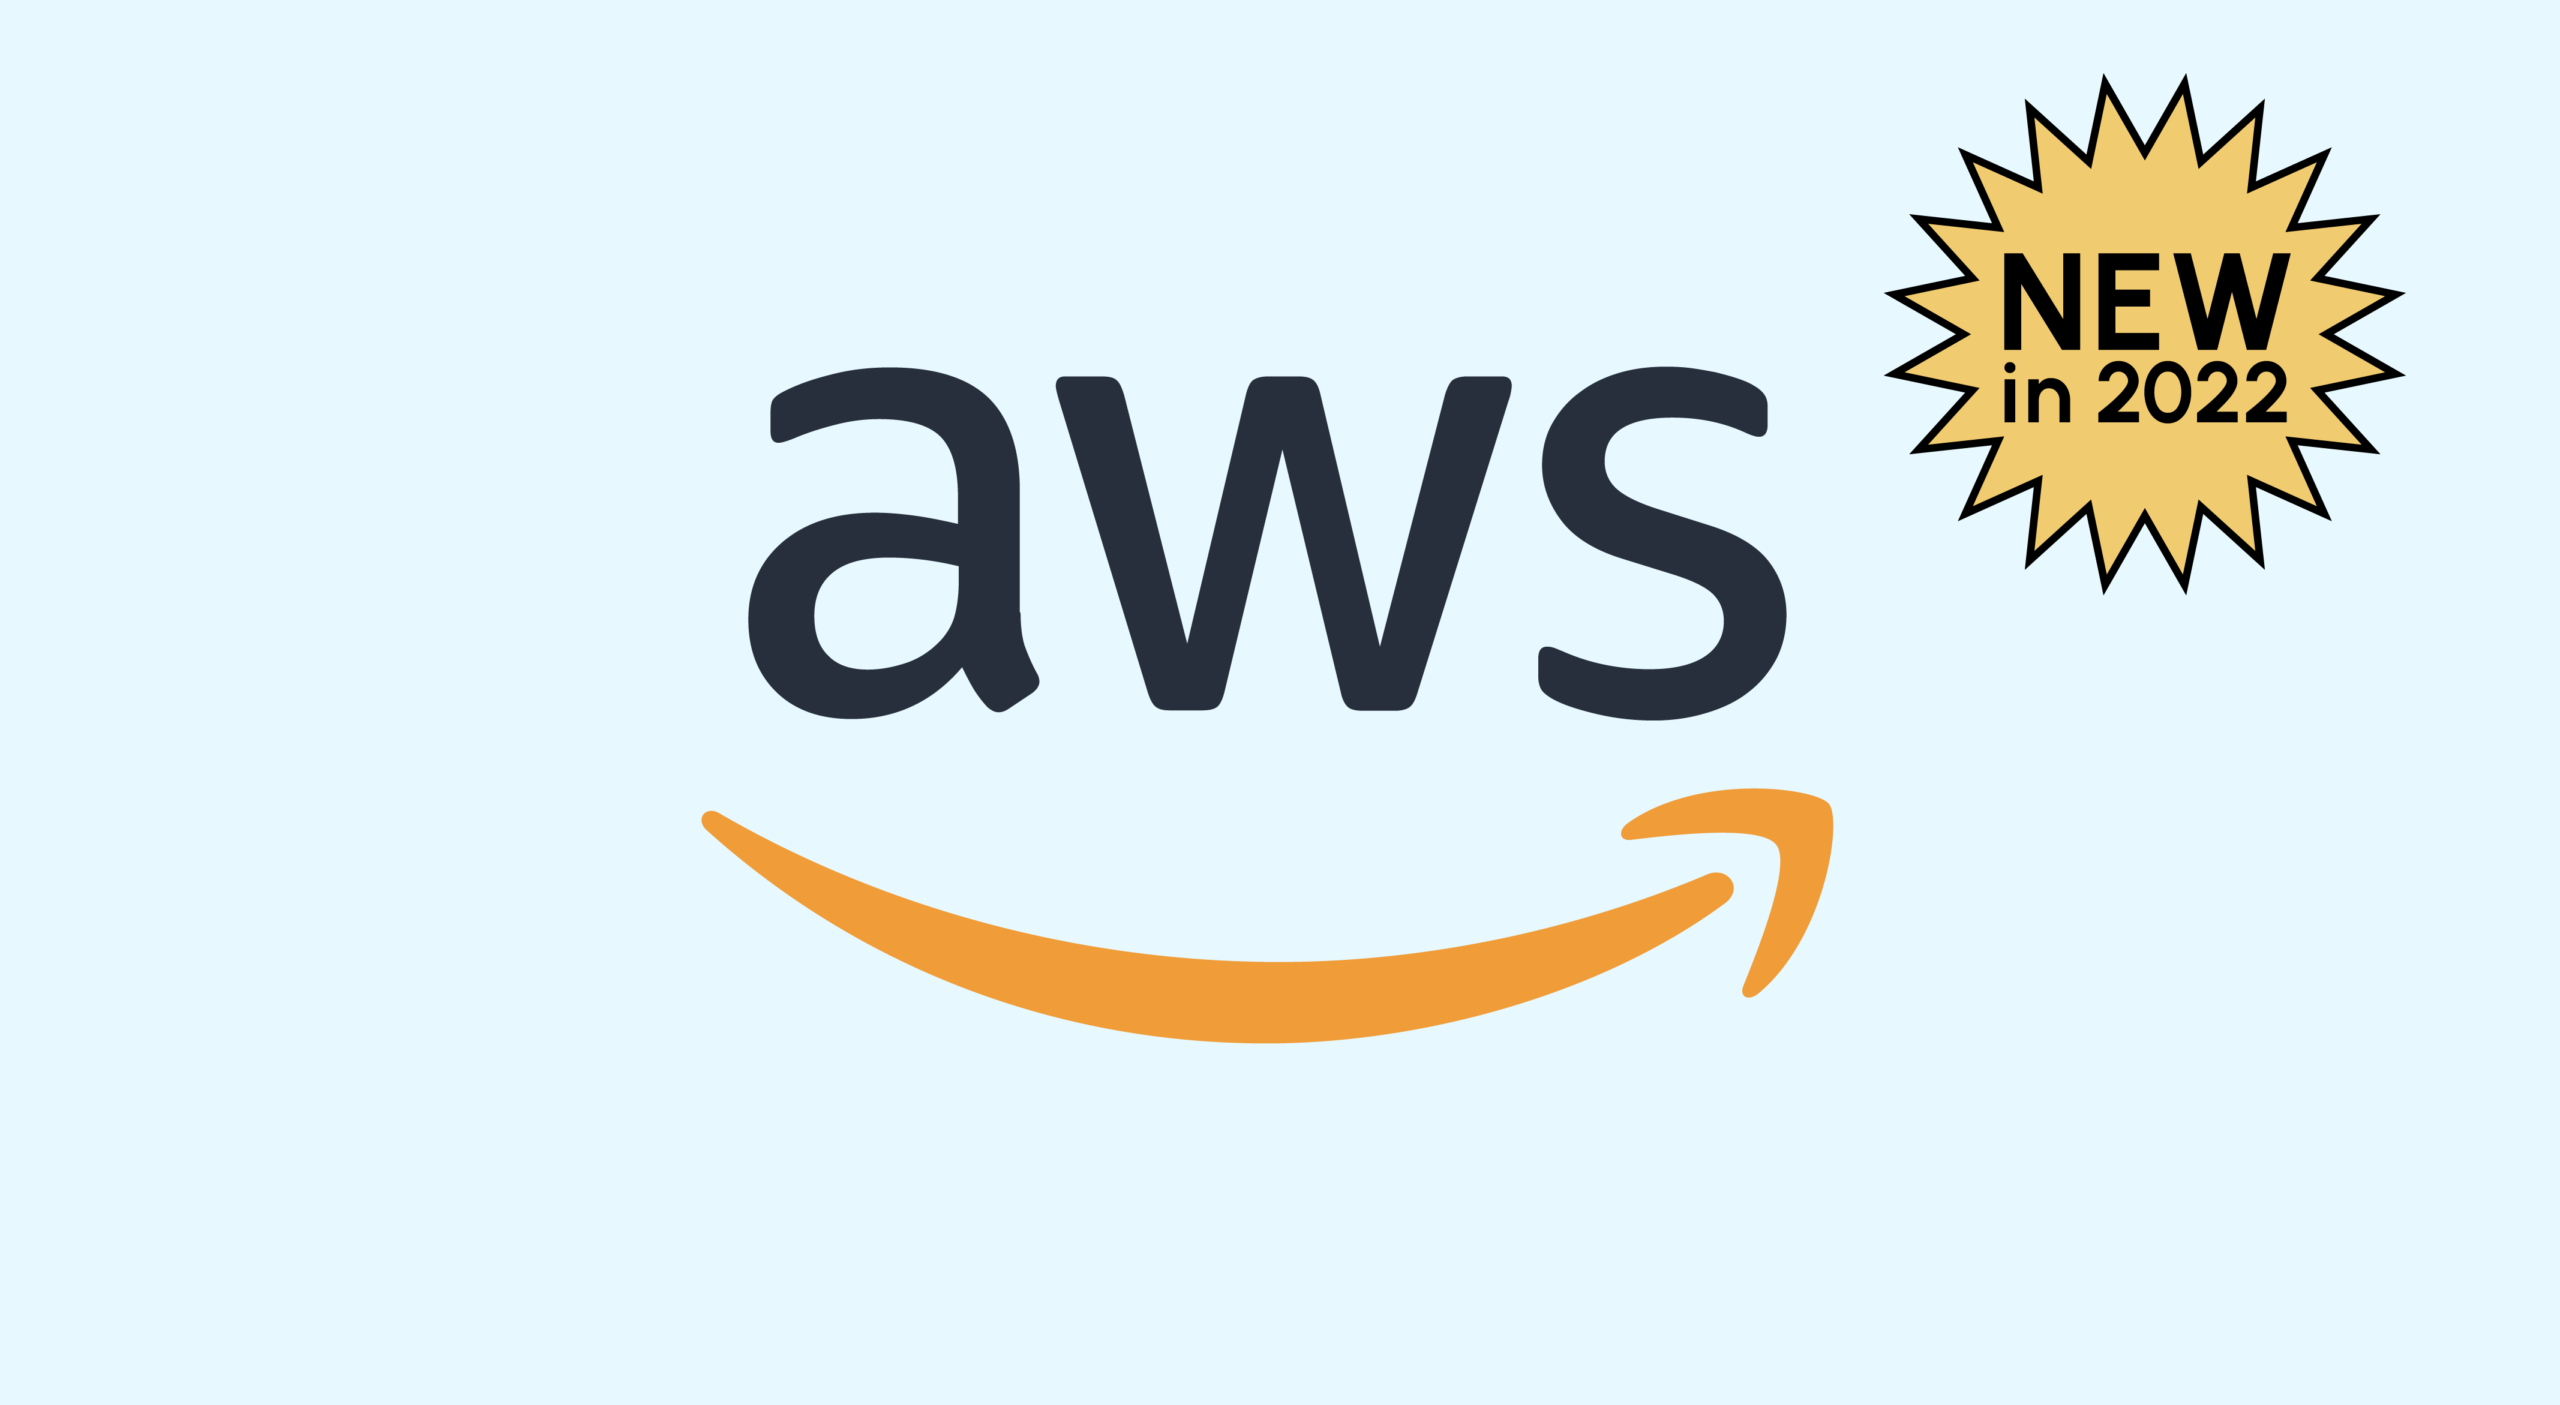 5 AWS launches and announcements making developers’ life easy in 2022